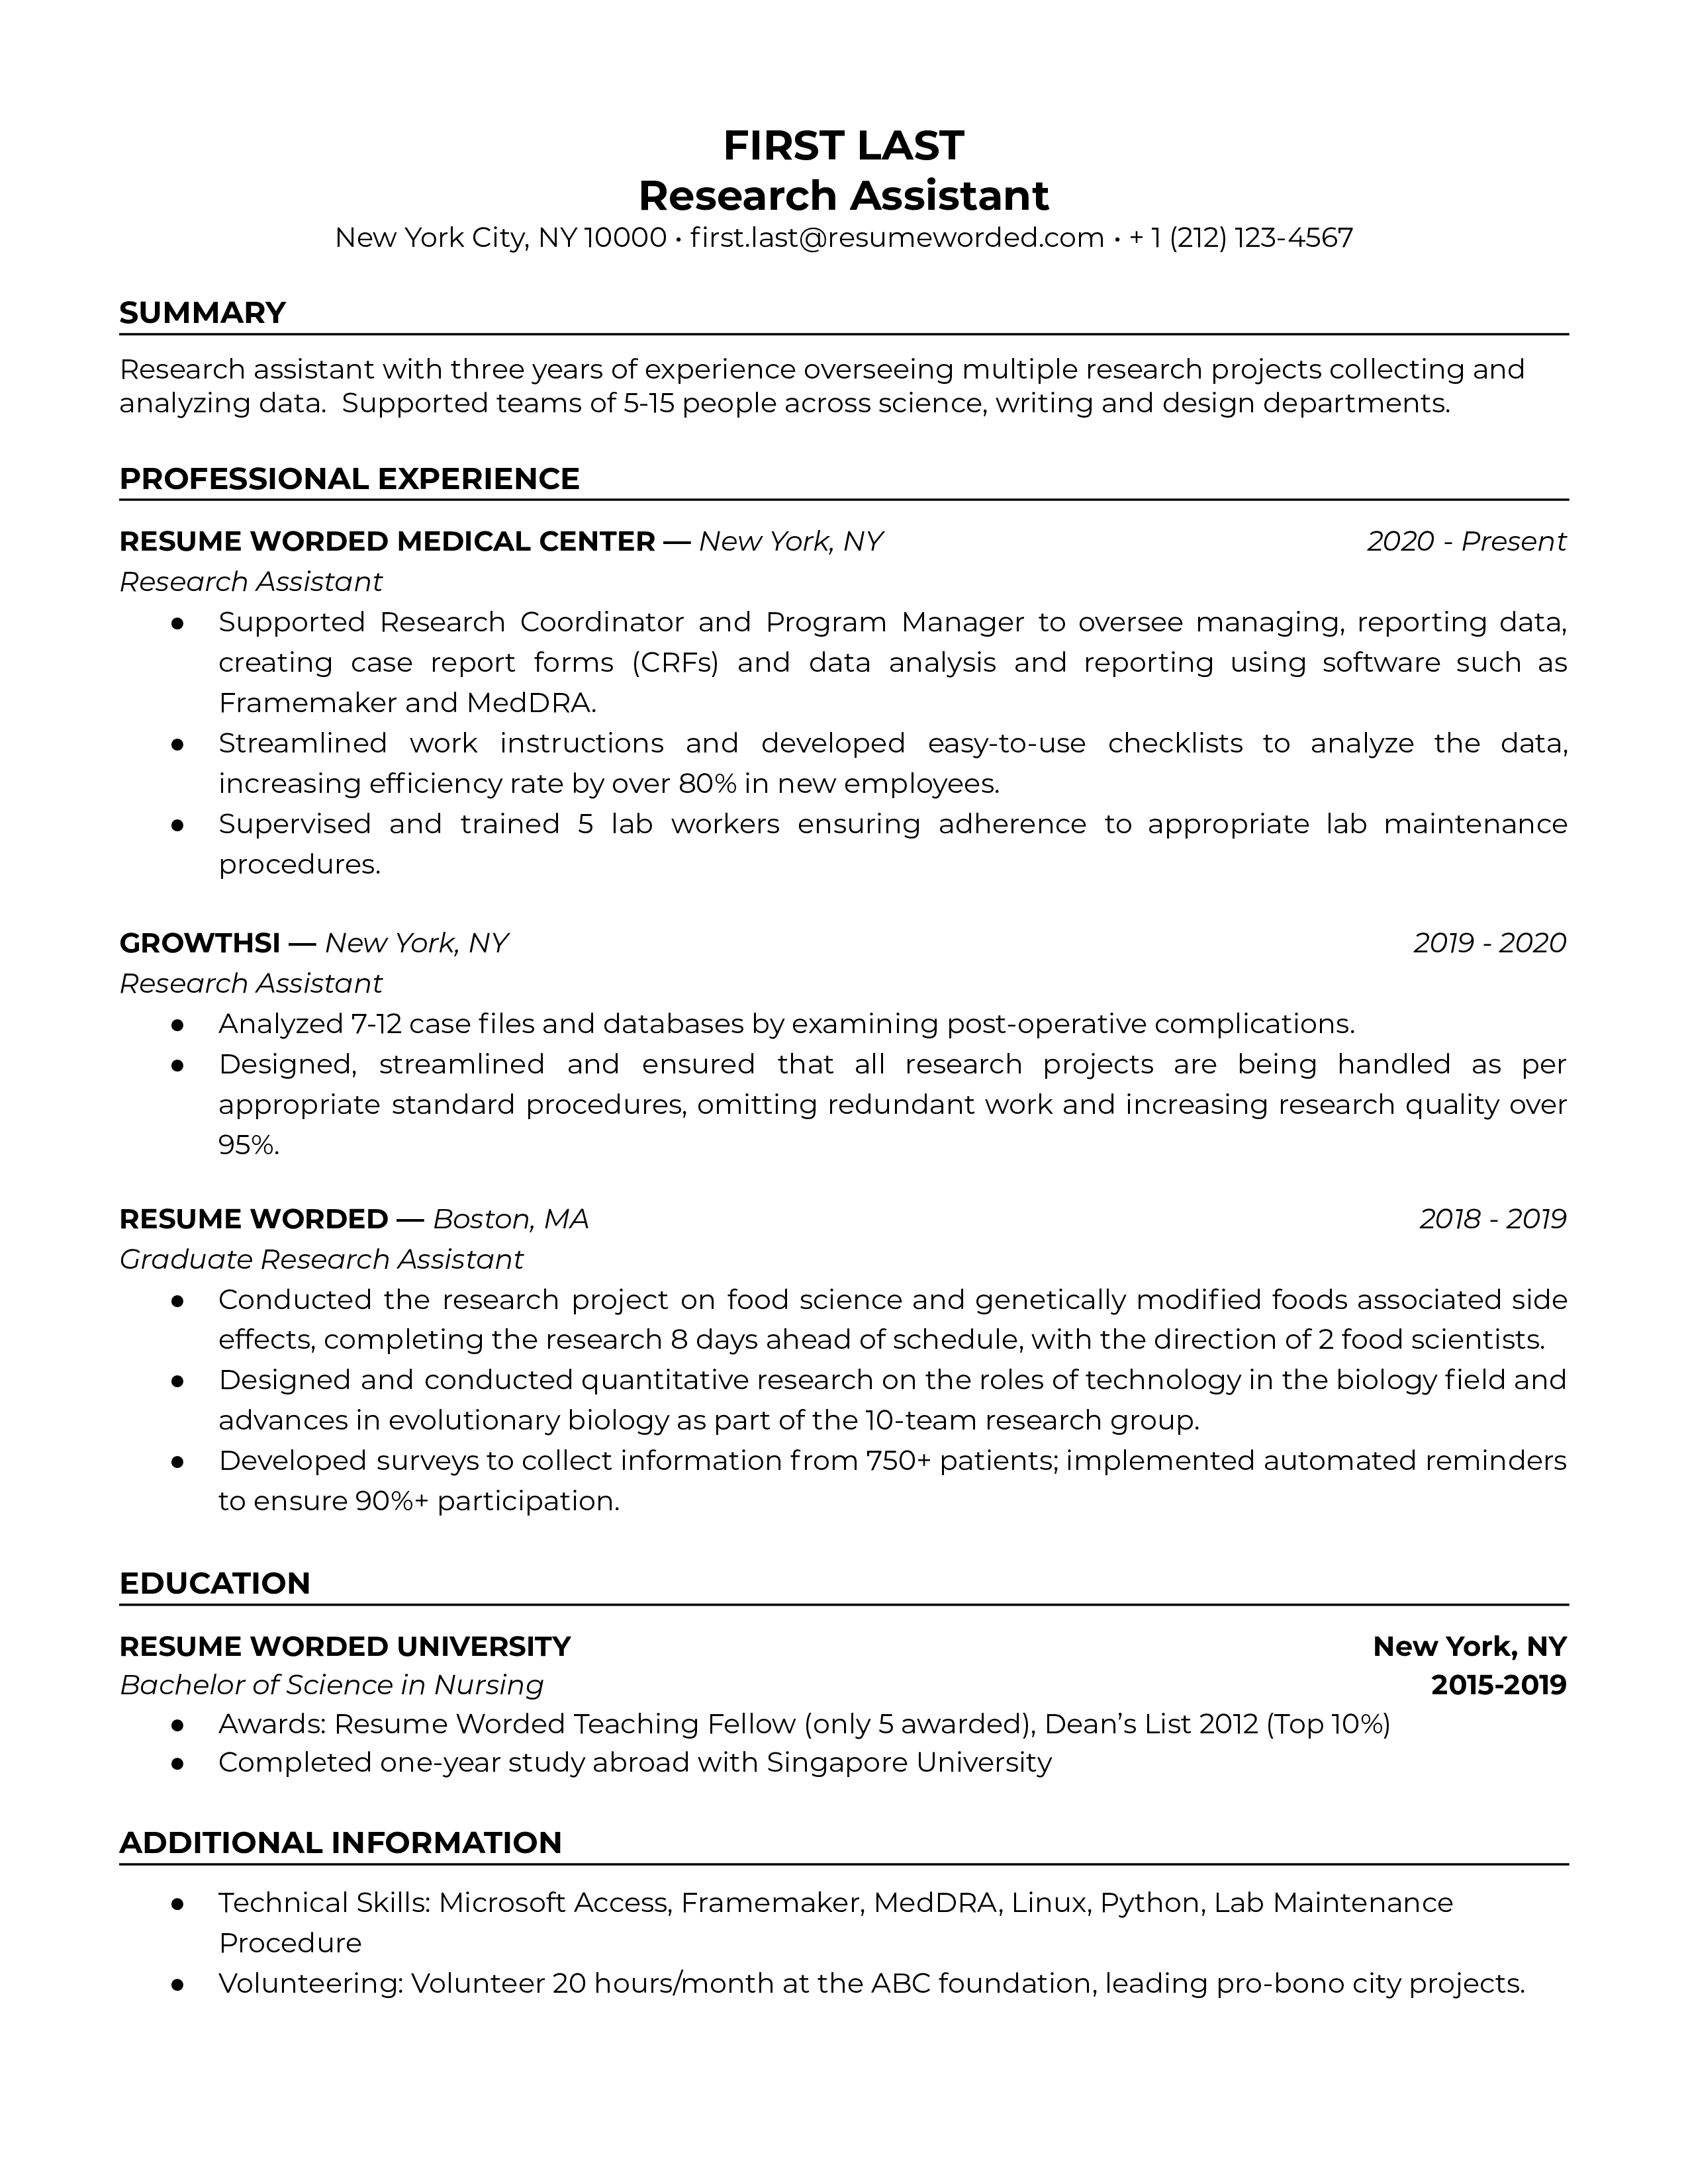 Research assistant resume summary example tailored to the job and using accomplishments to demonstrate soft skills